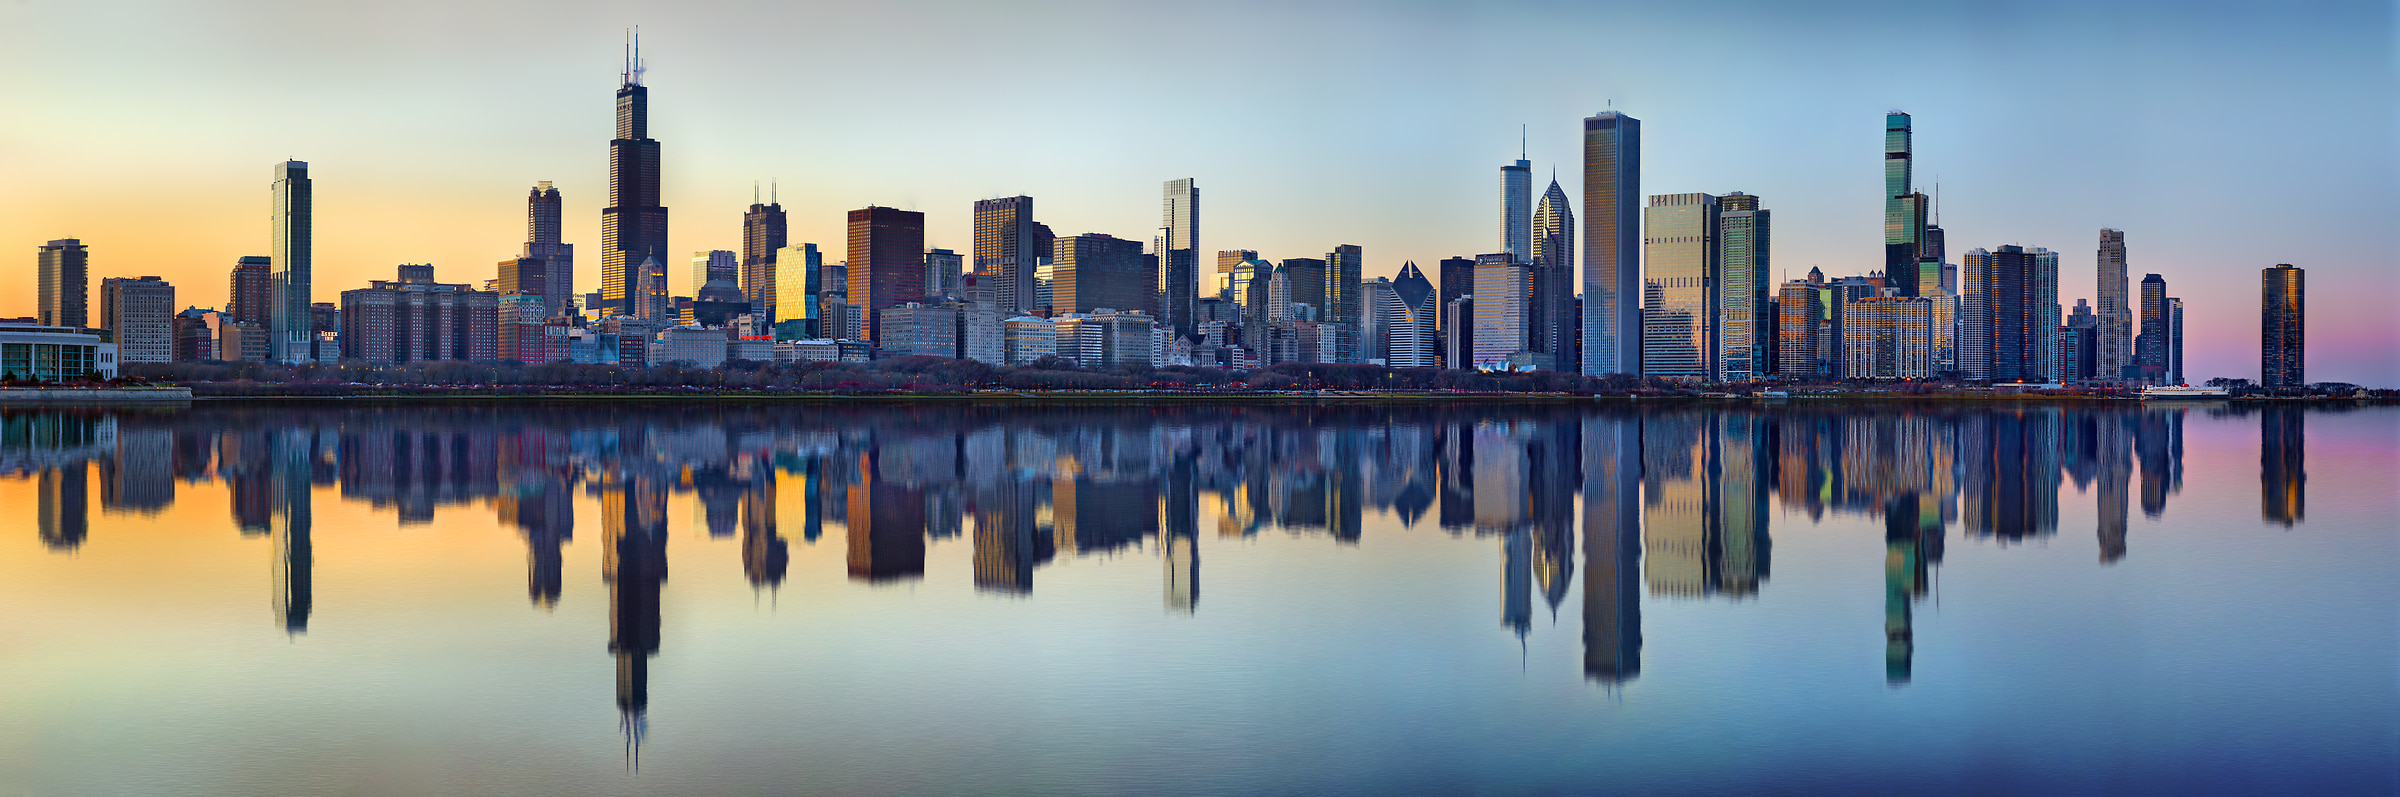 1,013 megapixels! A very high resolution, large-format VAST photo print of the Chicago skyline at sunset with Lake Michigan in the foreground; cityscape photograph created by Phil Crawshay in Chicago, Illinois.